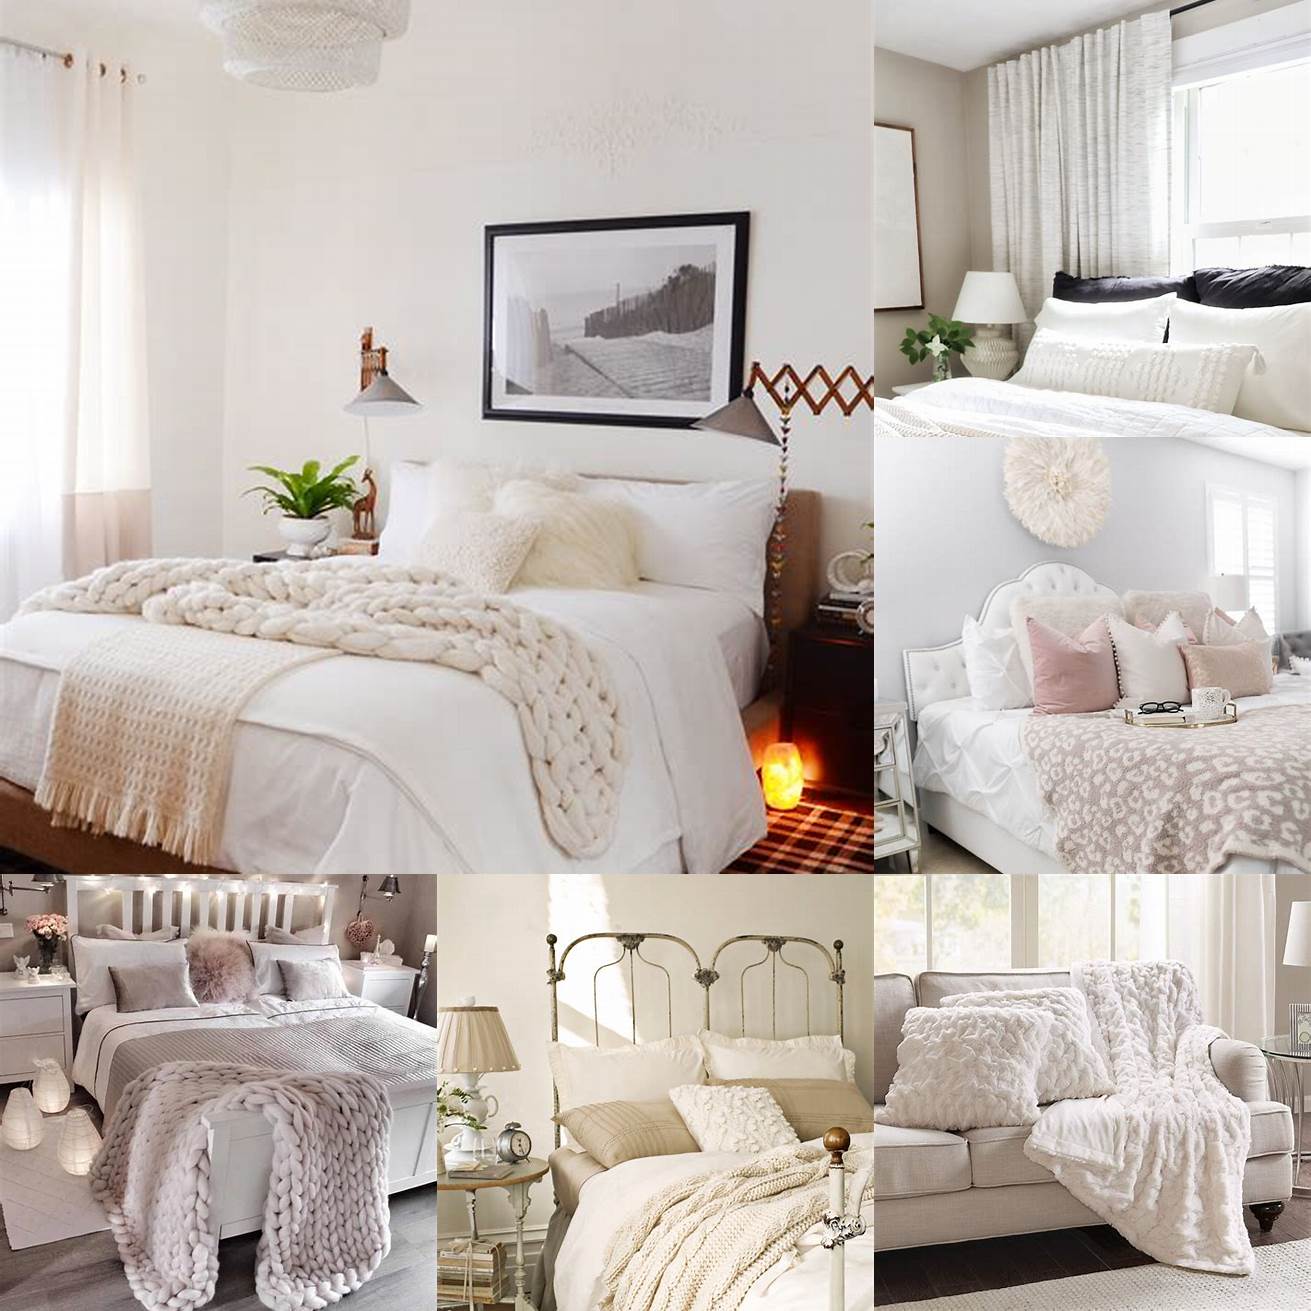 Add cozy textures like blankets and pillows to make your bedroom feel more inviting